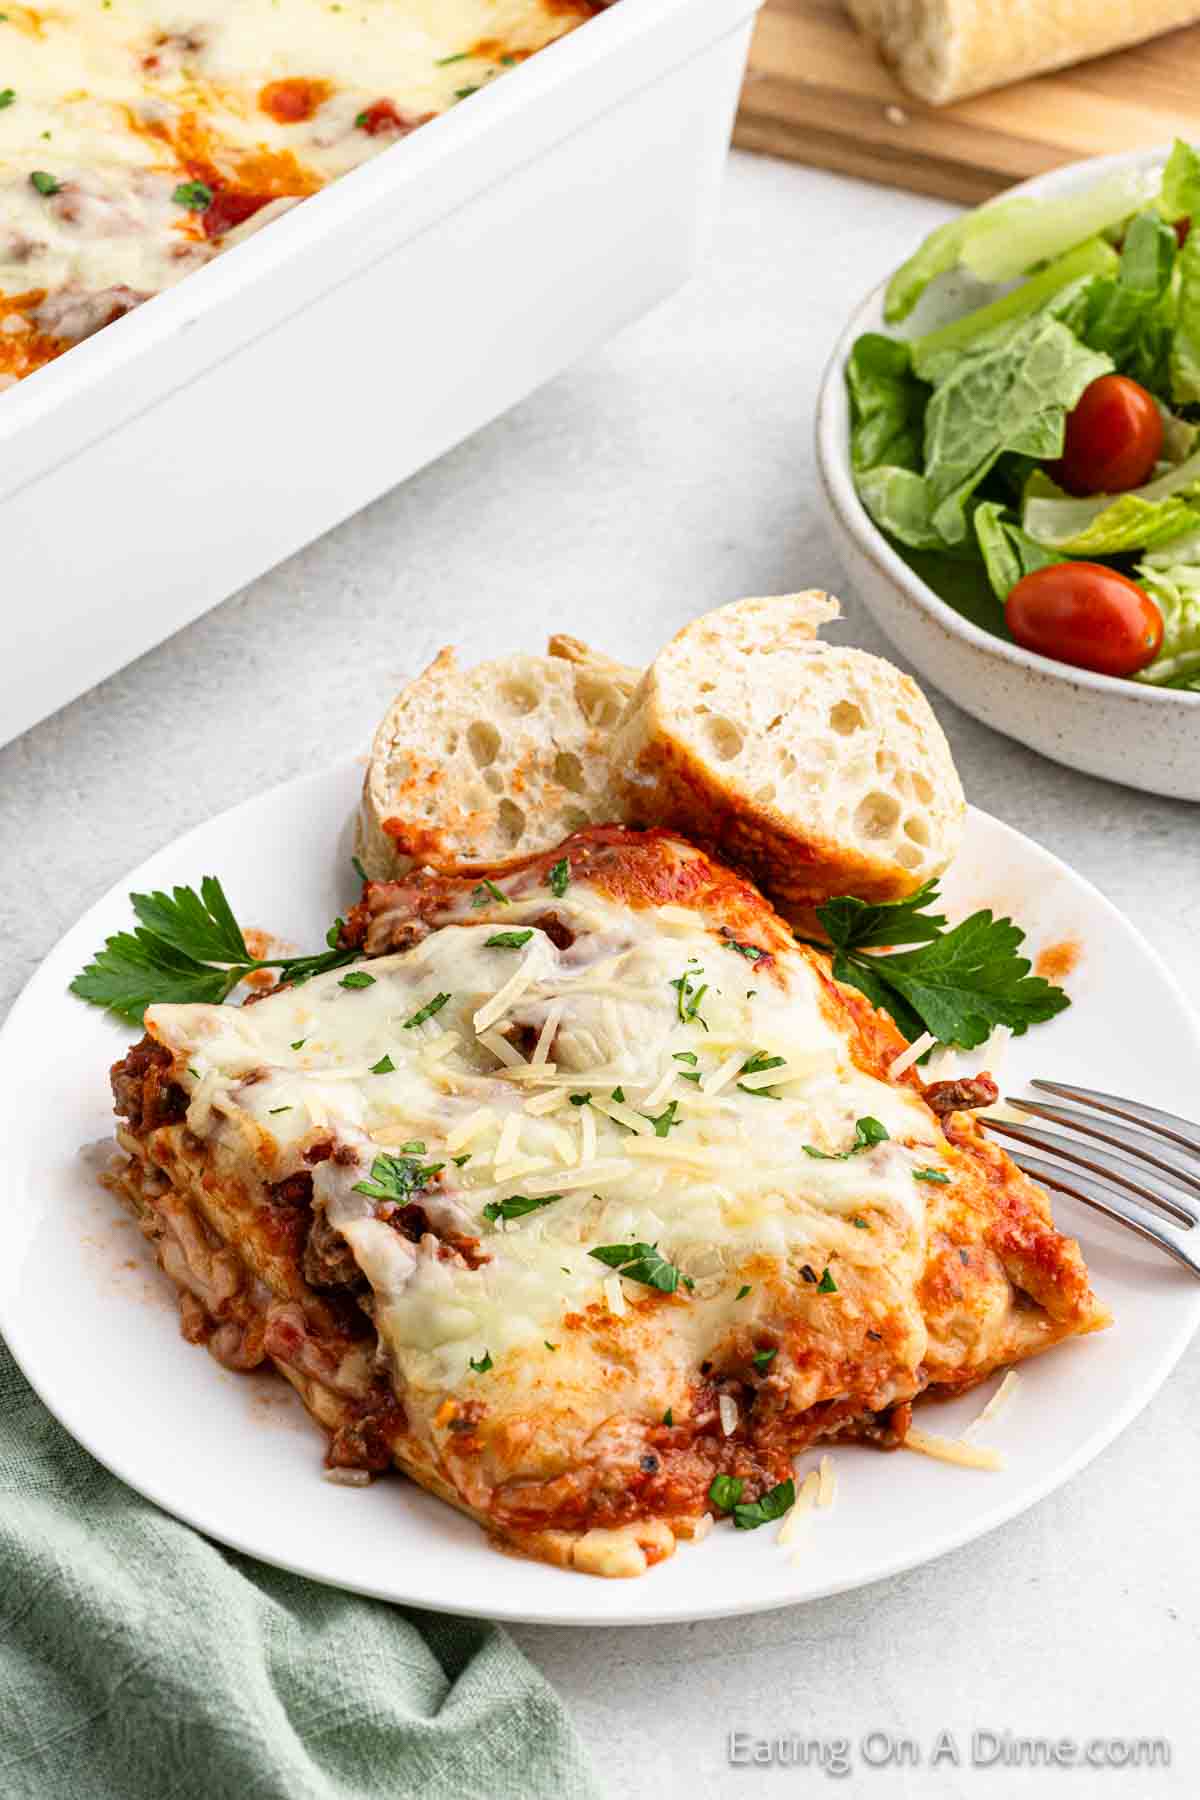 A serving of Ravioli Lasagna on a plate with two slices of bread